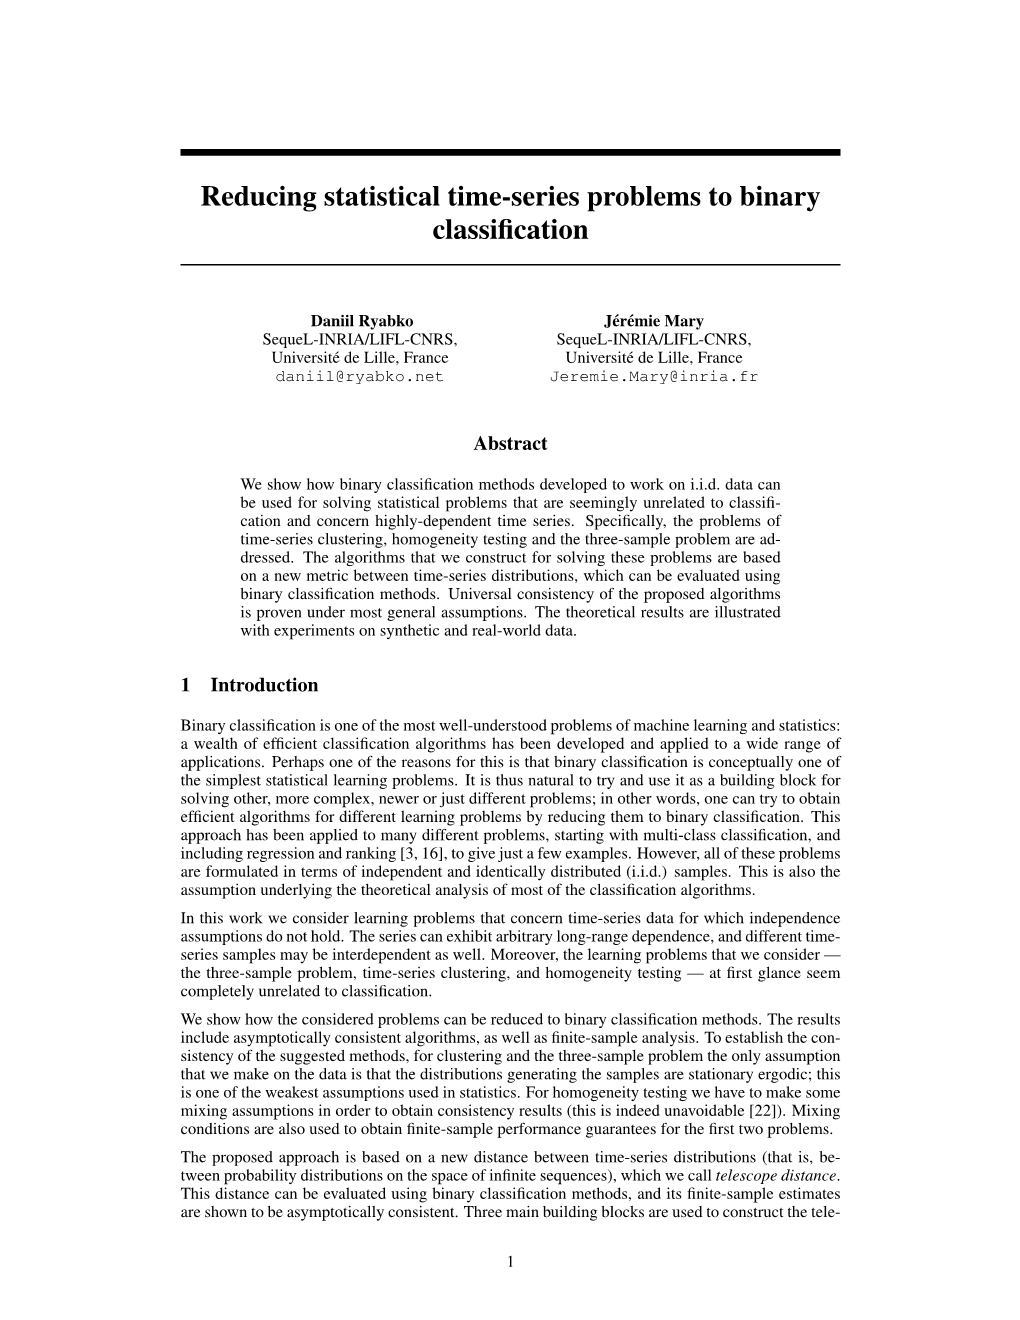 Reducing Statistical Time-Series Problems to Binary Classification